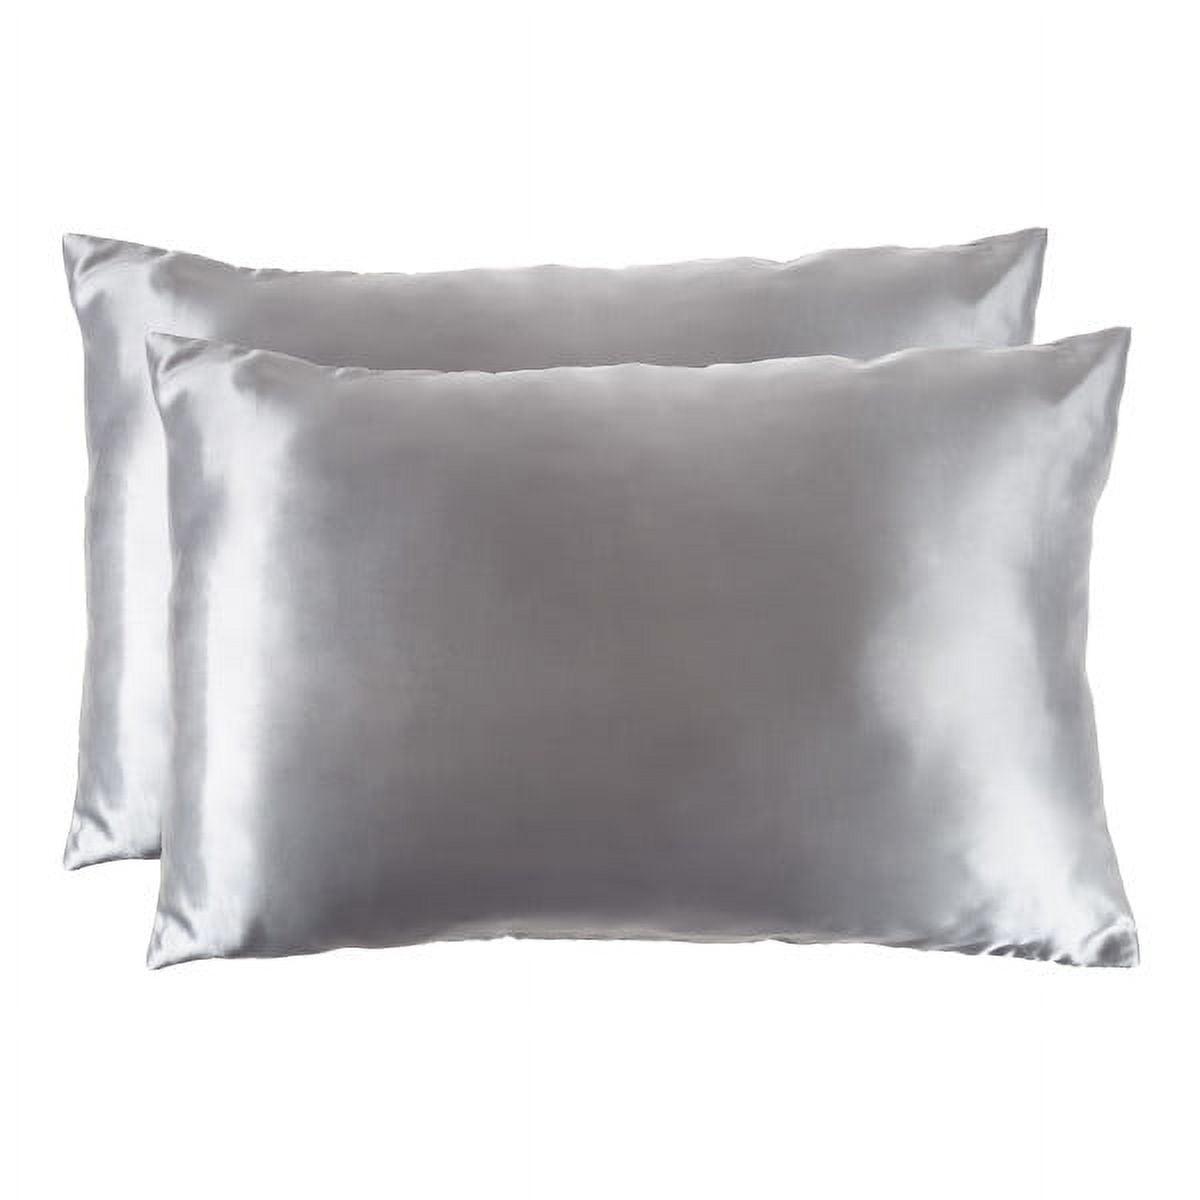 Luxurious Satin King-Size Pillowcases in Silver Gray - Set of 2